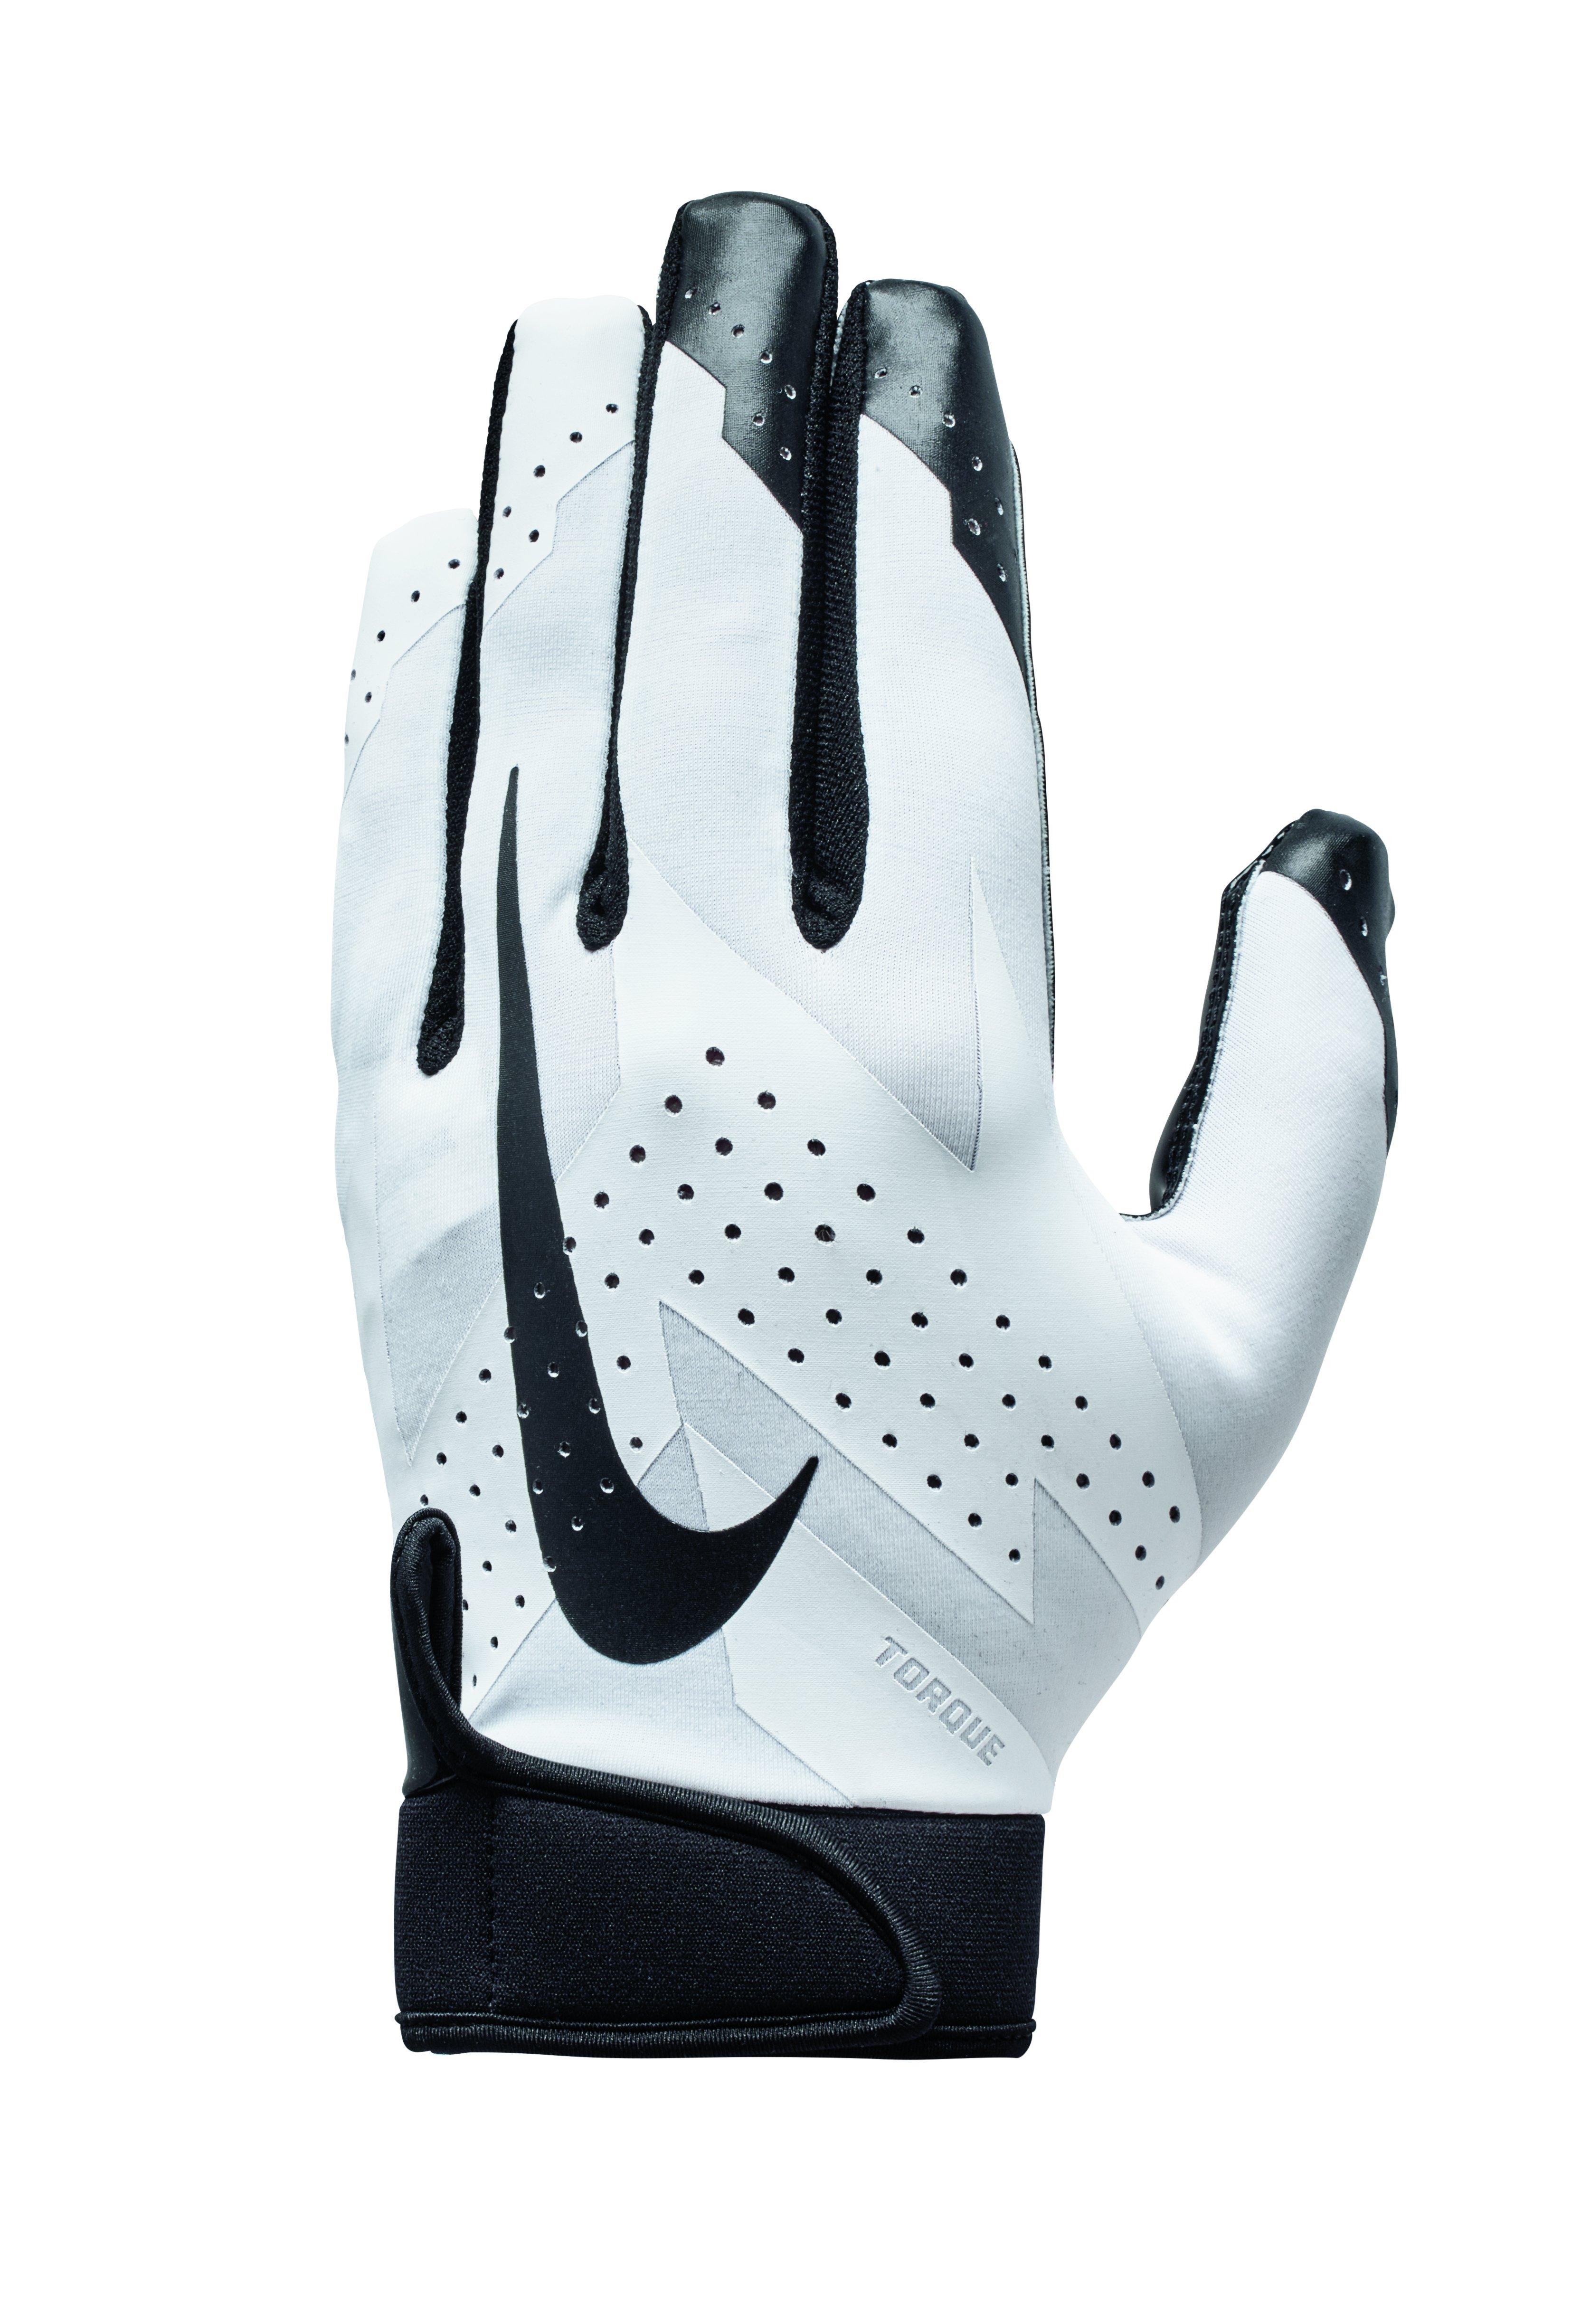 Nike Youth Torque 2.0 Receiver